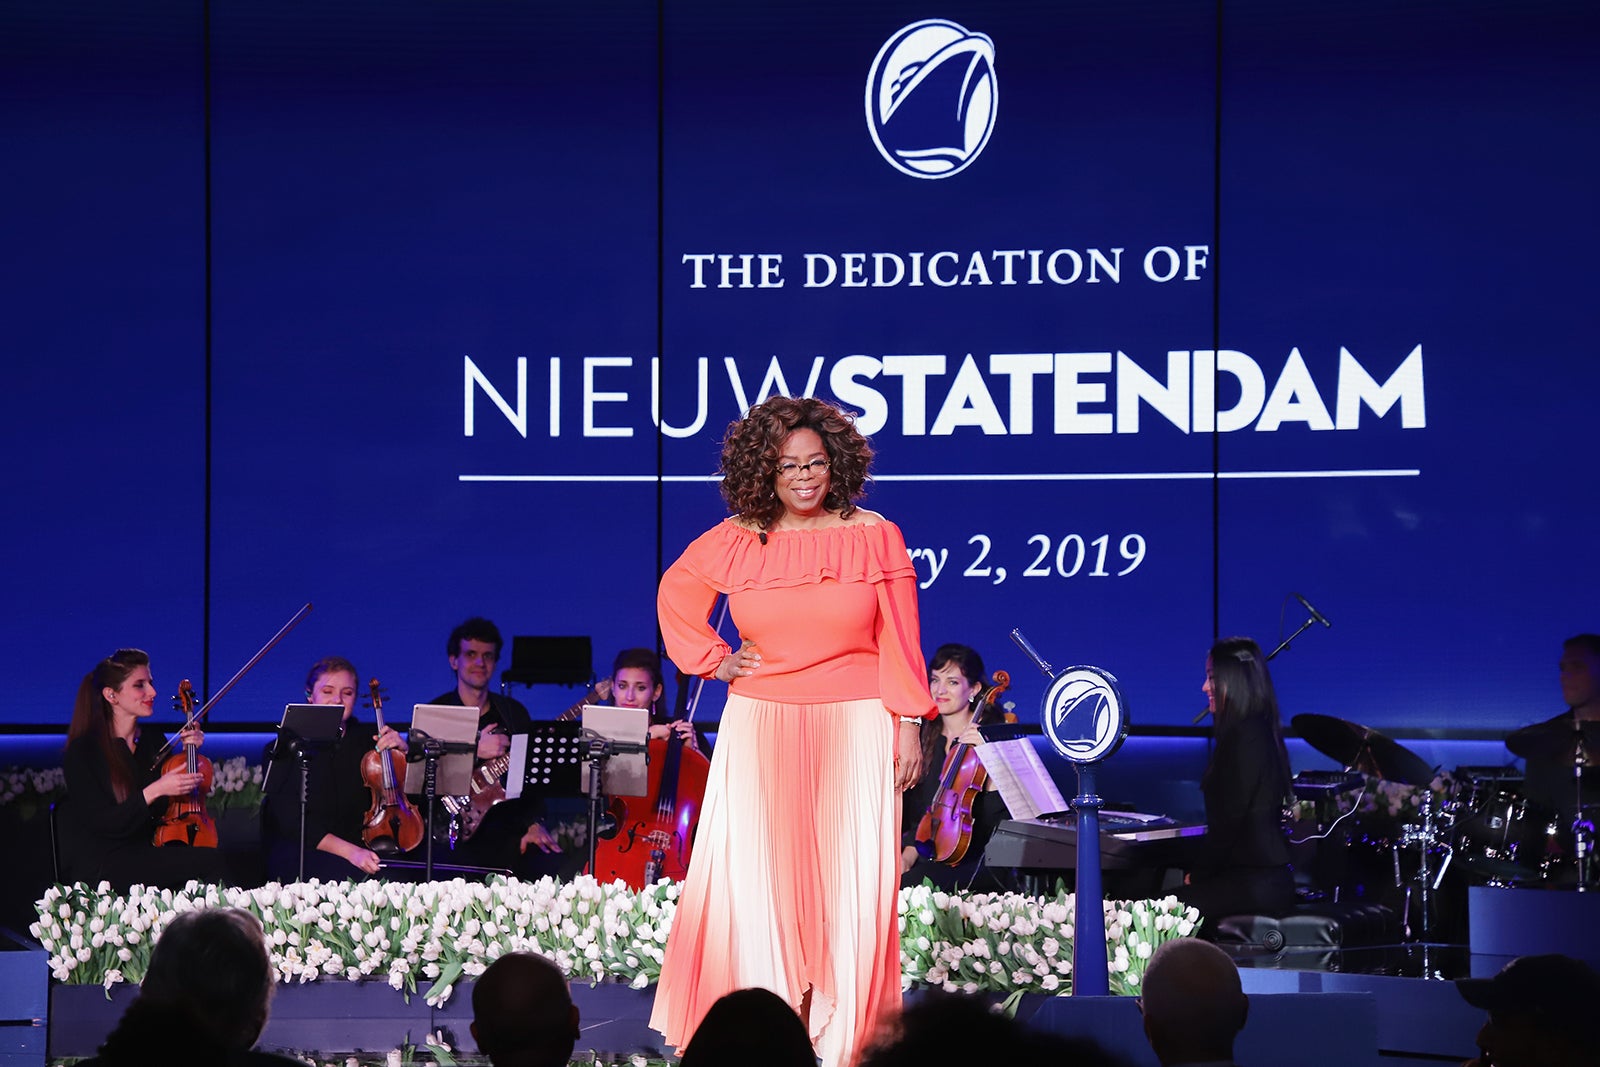 FORT LAUDERDALE, FL - FEBRUARY 02: Godmother Oprah Winfrey speaks onstage during the Holland America Line and Nieuw Statendam Dedication with Godmother Oprah Winfrey at Port Everglades on February 2, 2019 in Fort Lauderdale, Florida. (Photo by John Parra/Getty Images for Holland America)